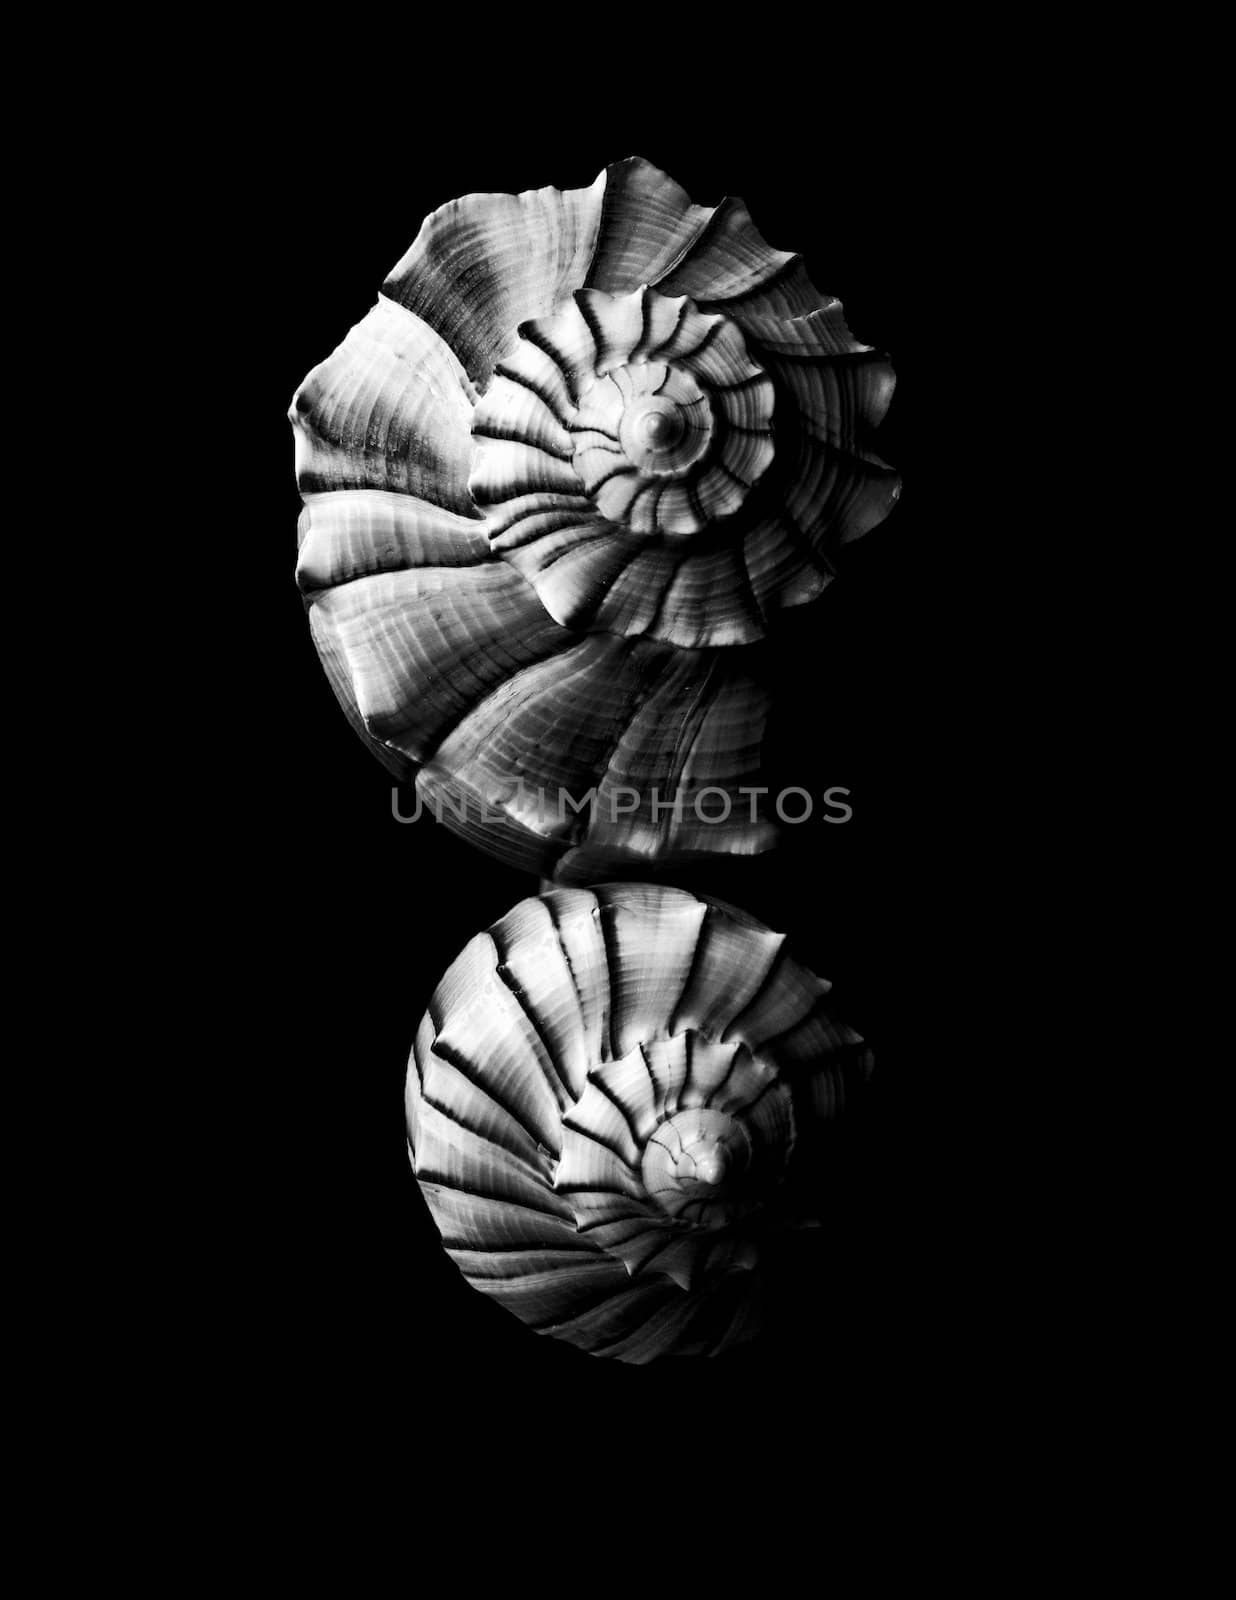 black and white seashell background in nature
